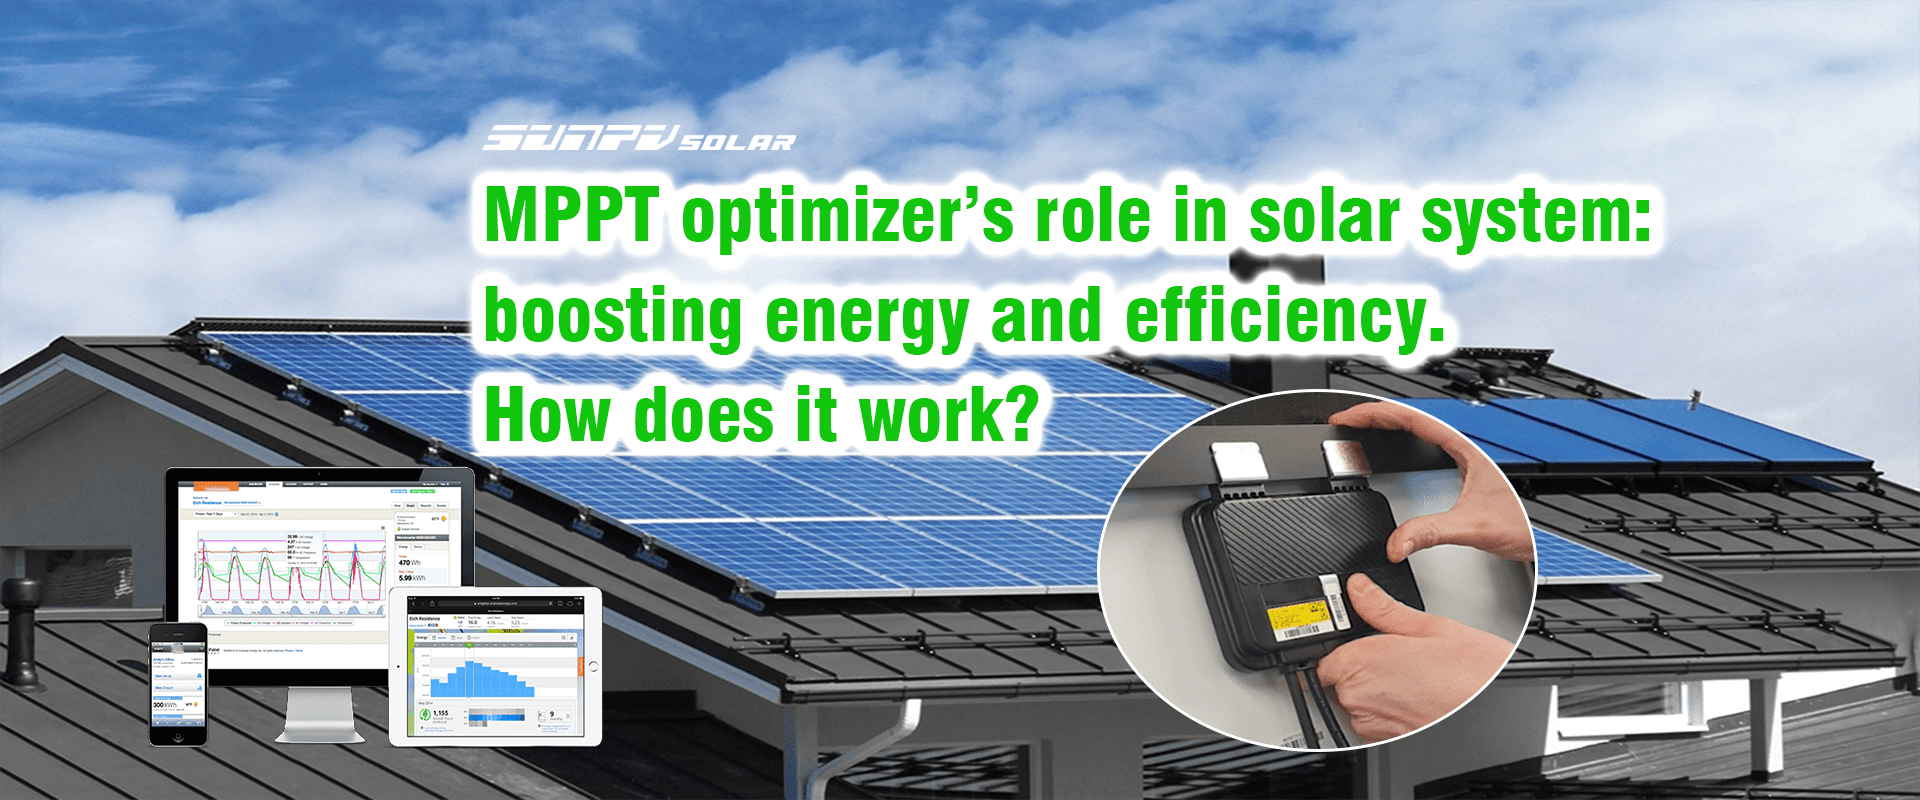 MPPT optimizer's role in solar system: boosting energy and efficiency. How does it work?